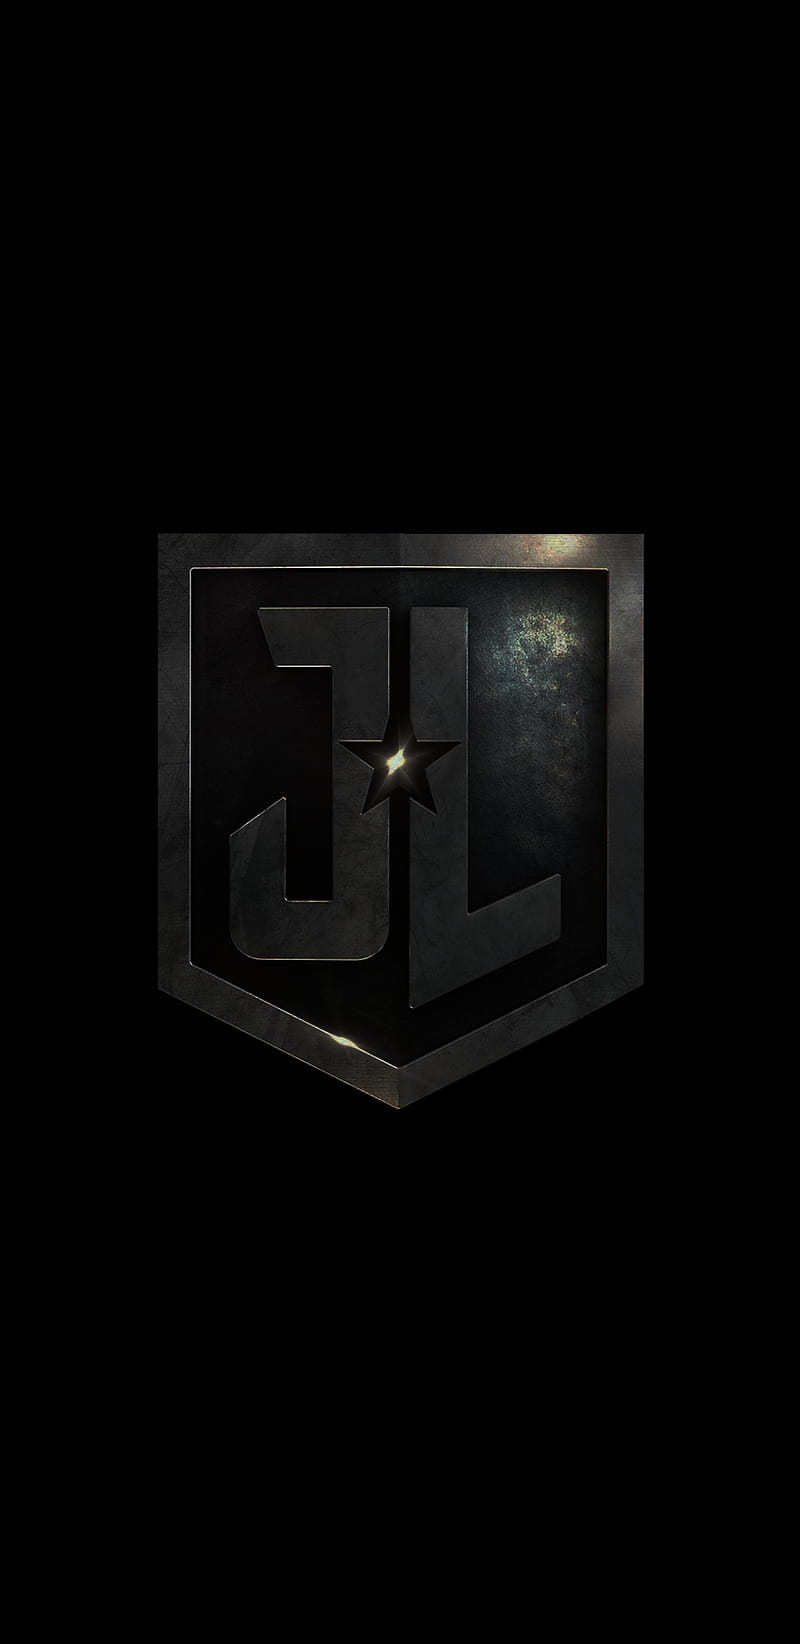 New Justice League Movie Logo Unveiled